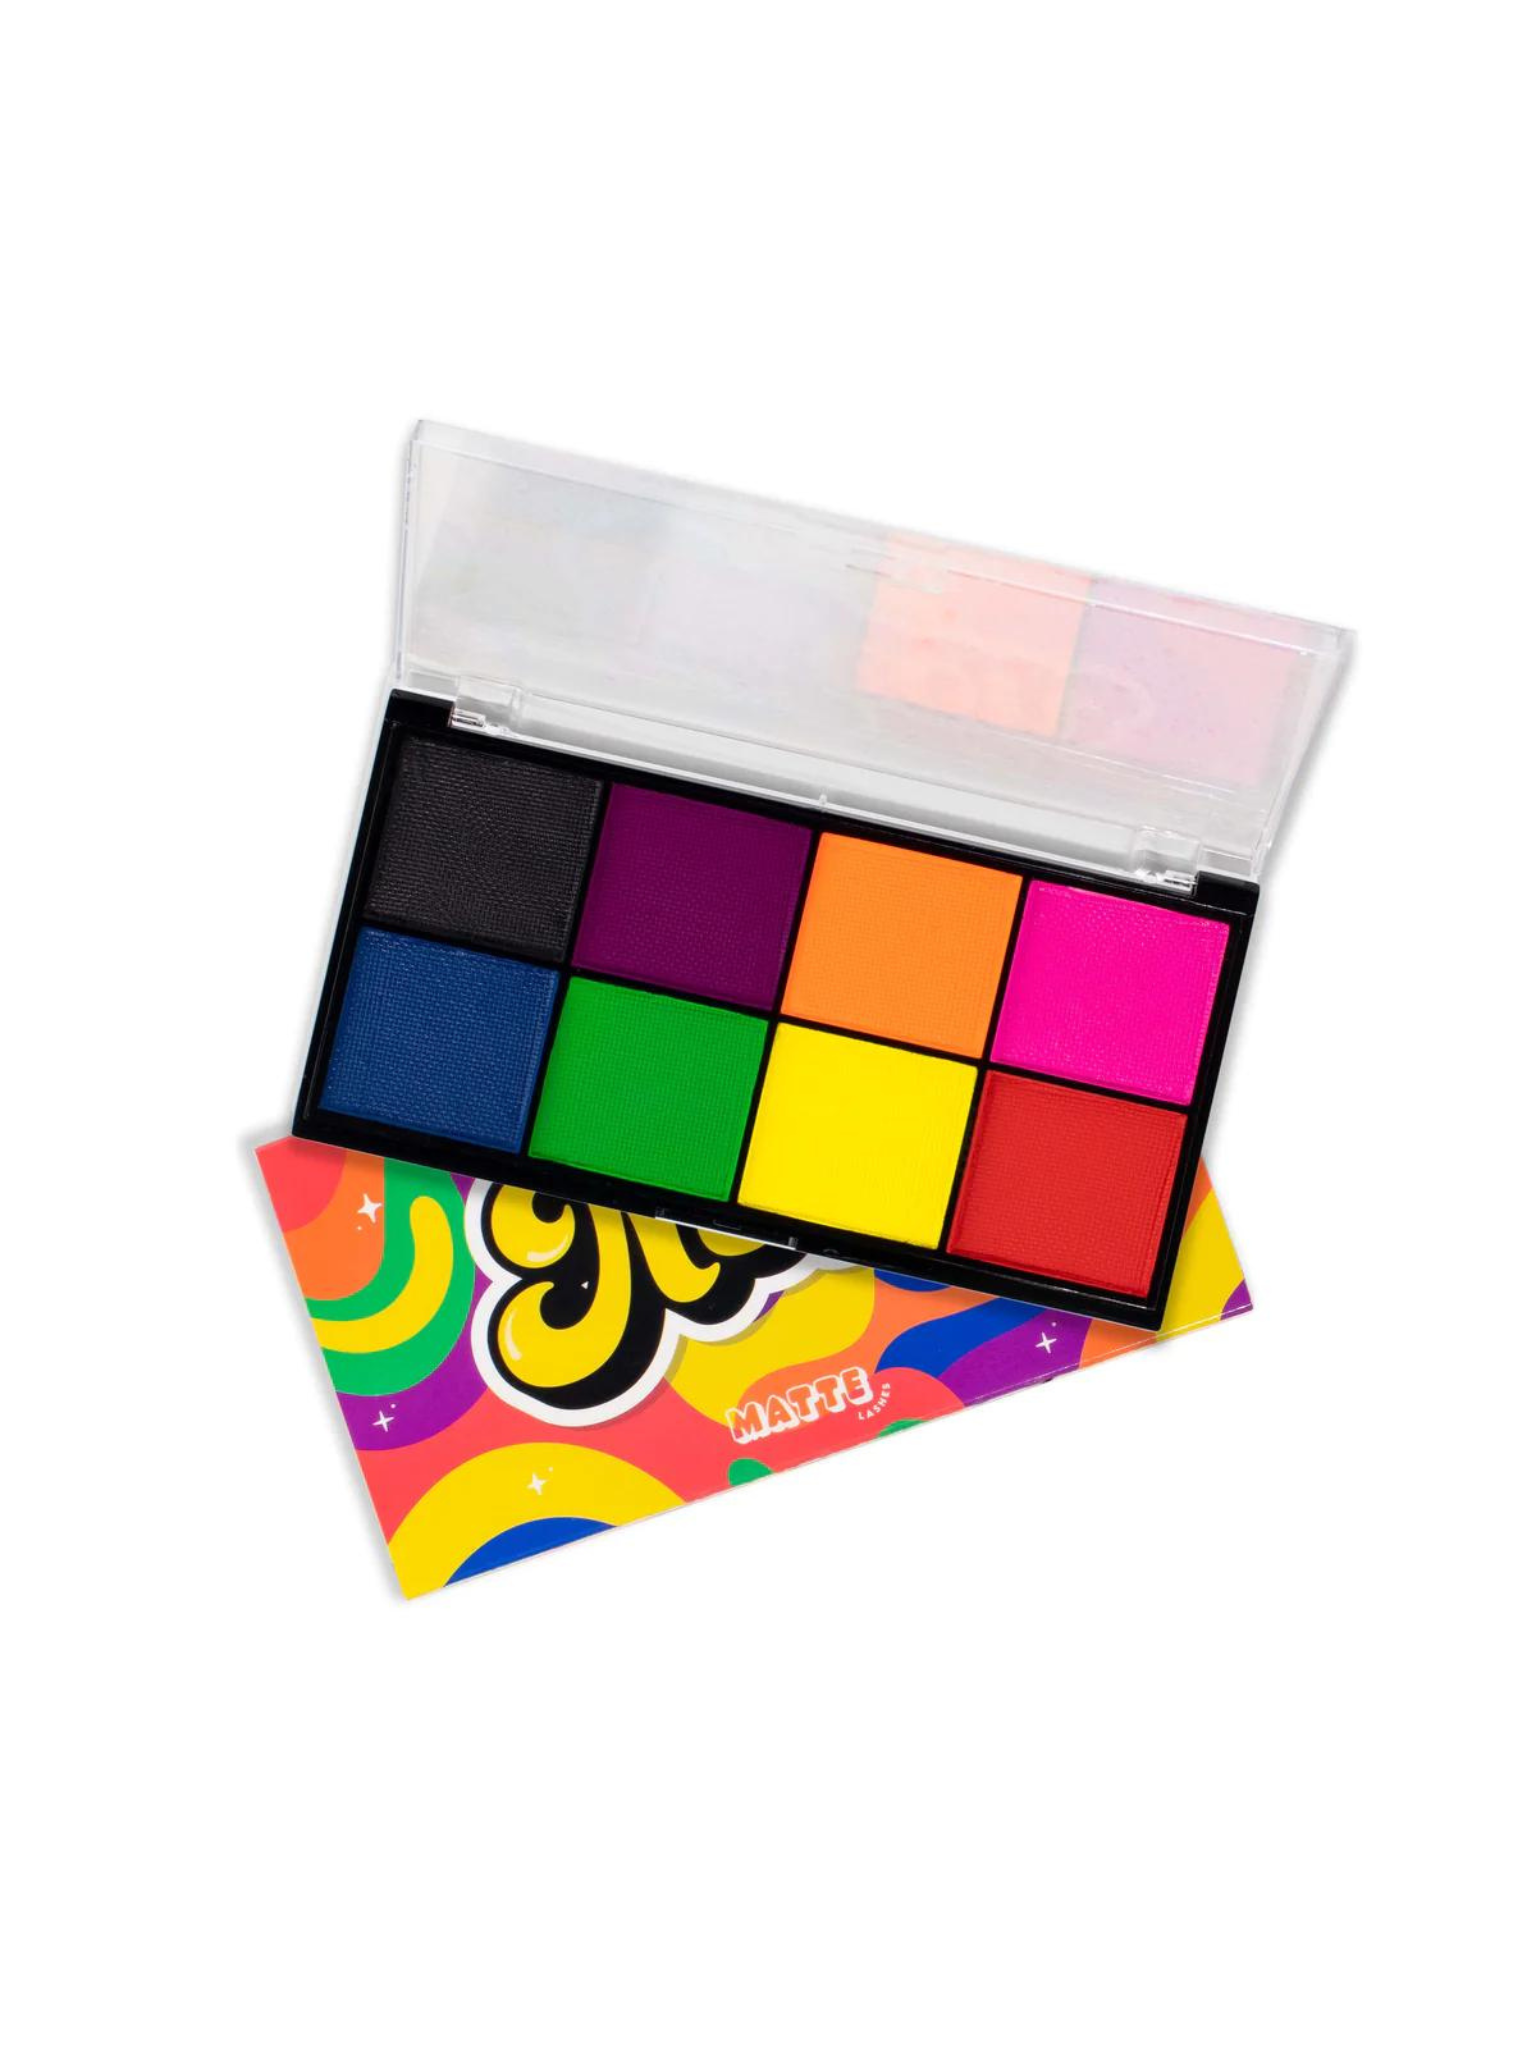 Neon Water-Activated Eyeliner Palette: Vegan and Cruelty-Free